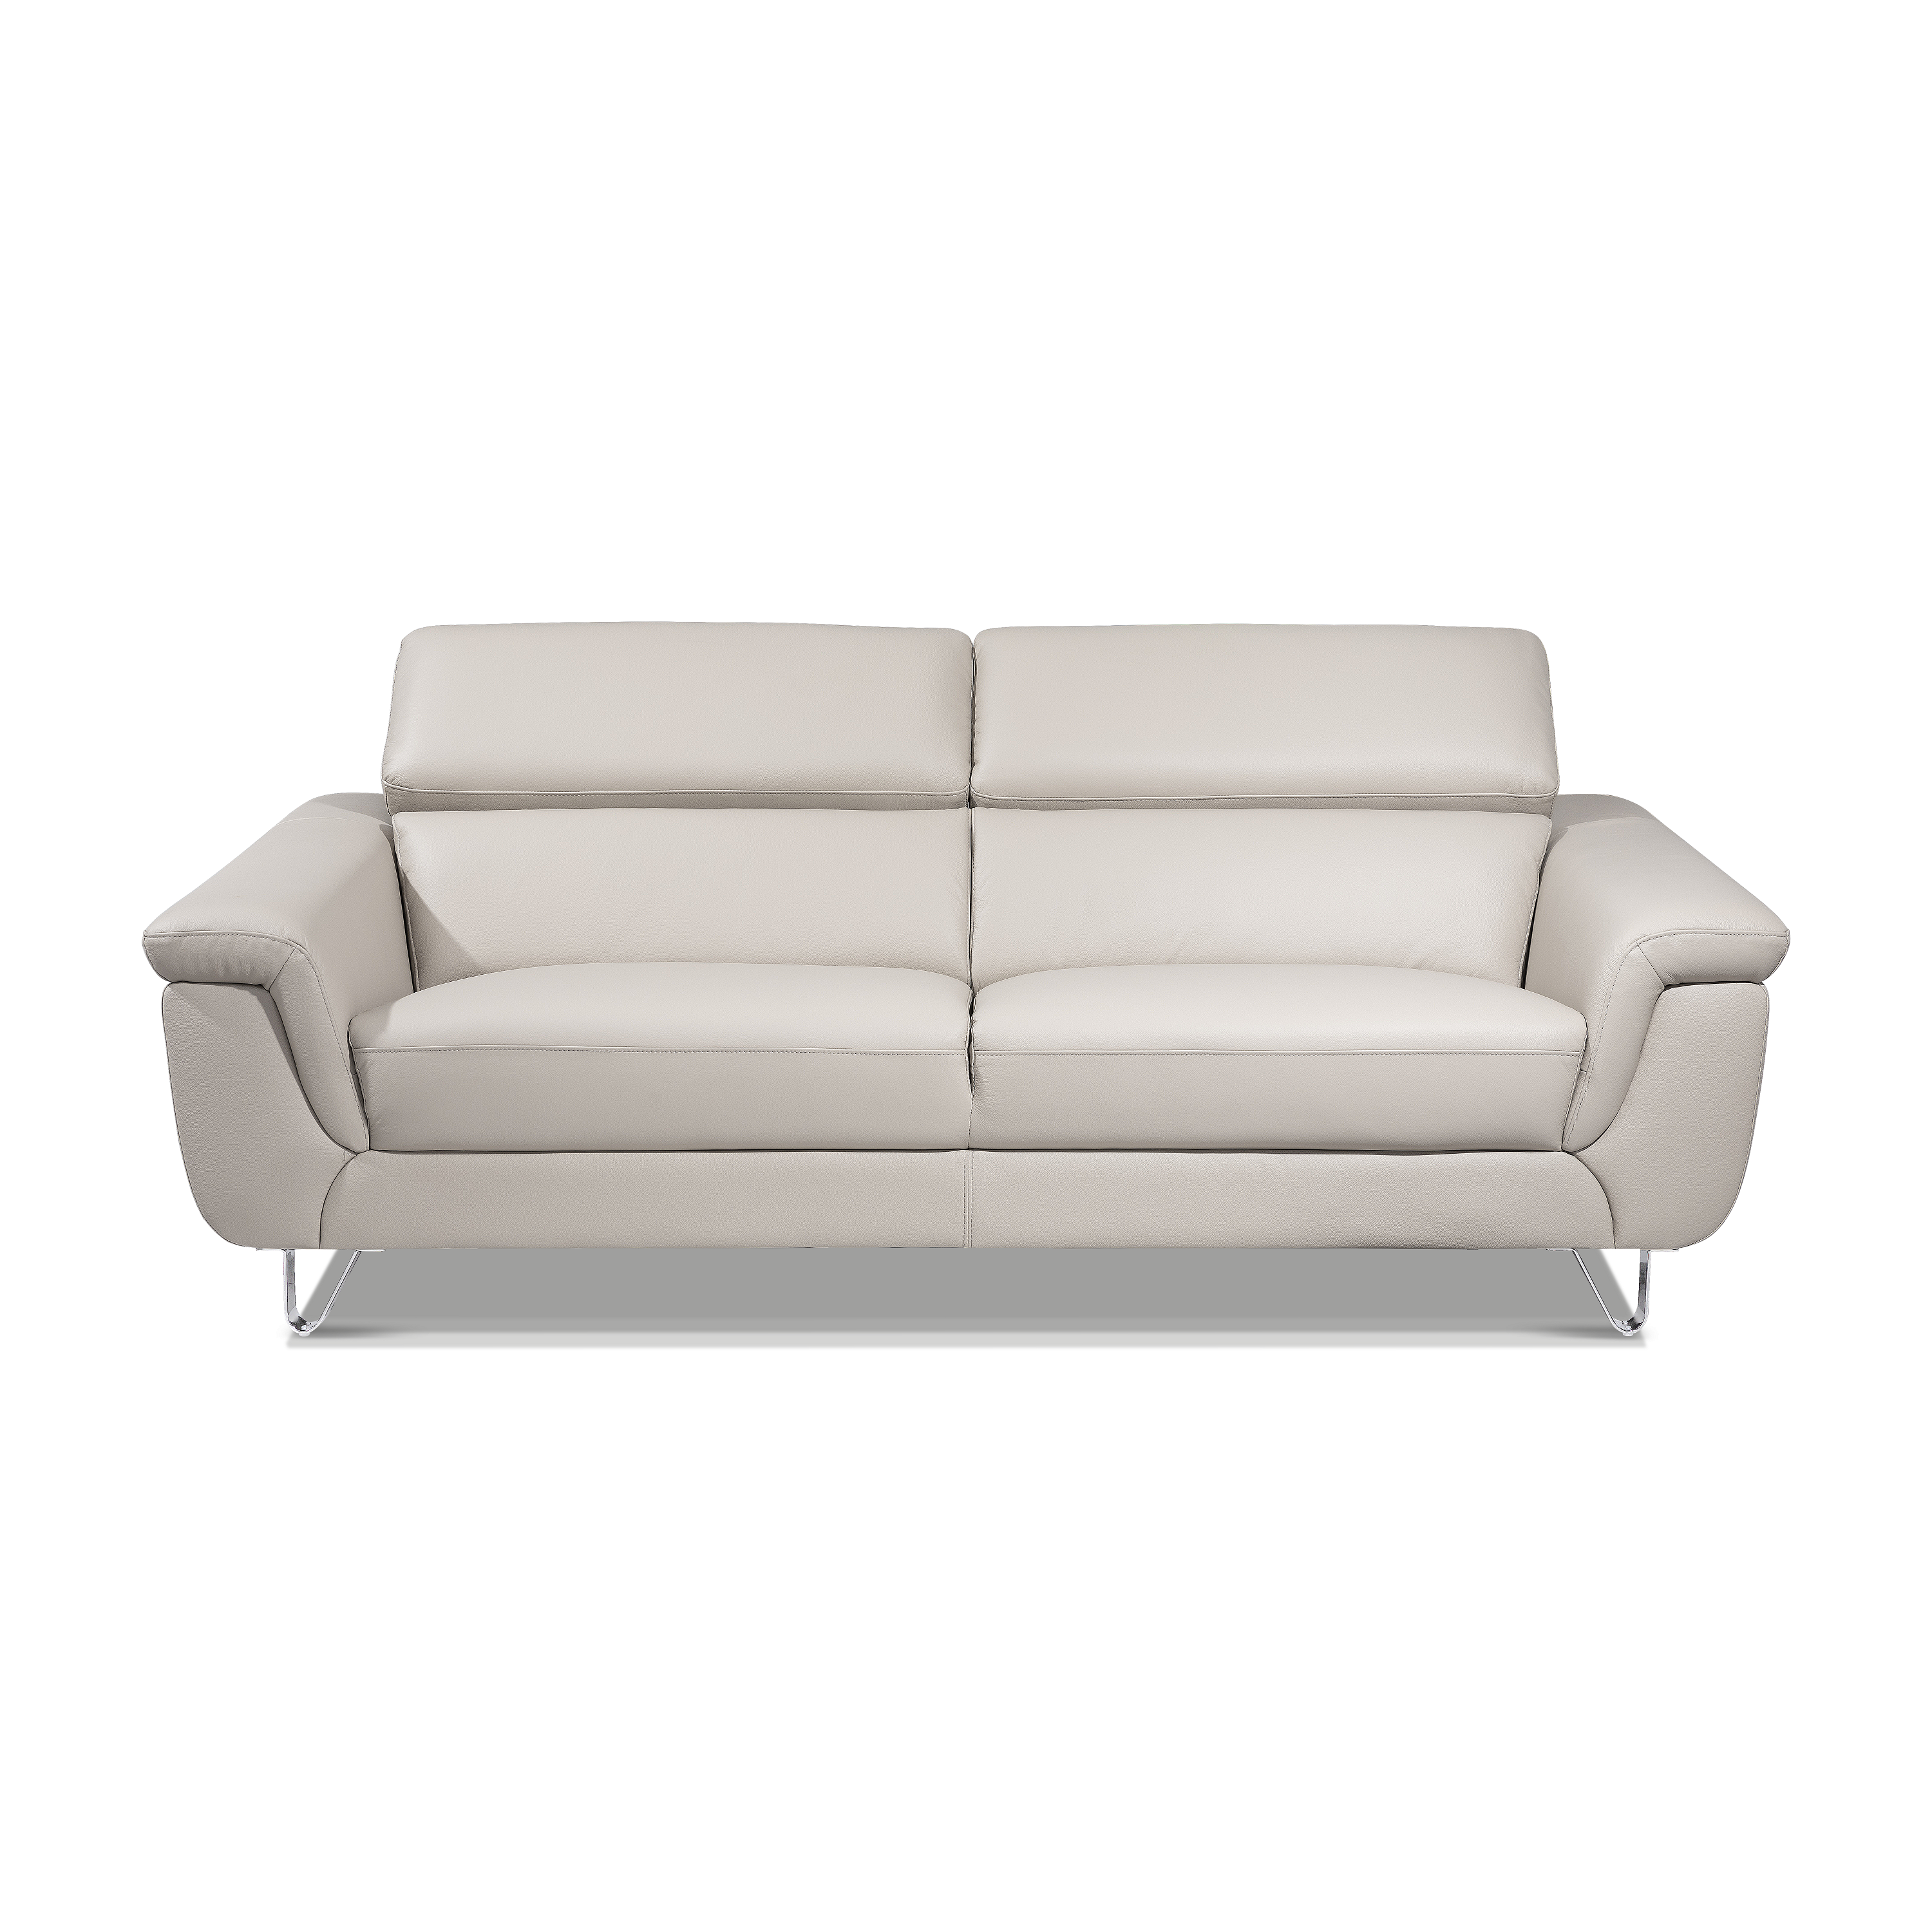 FD2814 - 3-seater Sofa (Taupe Leather Touch) - 46254